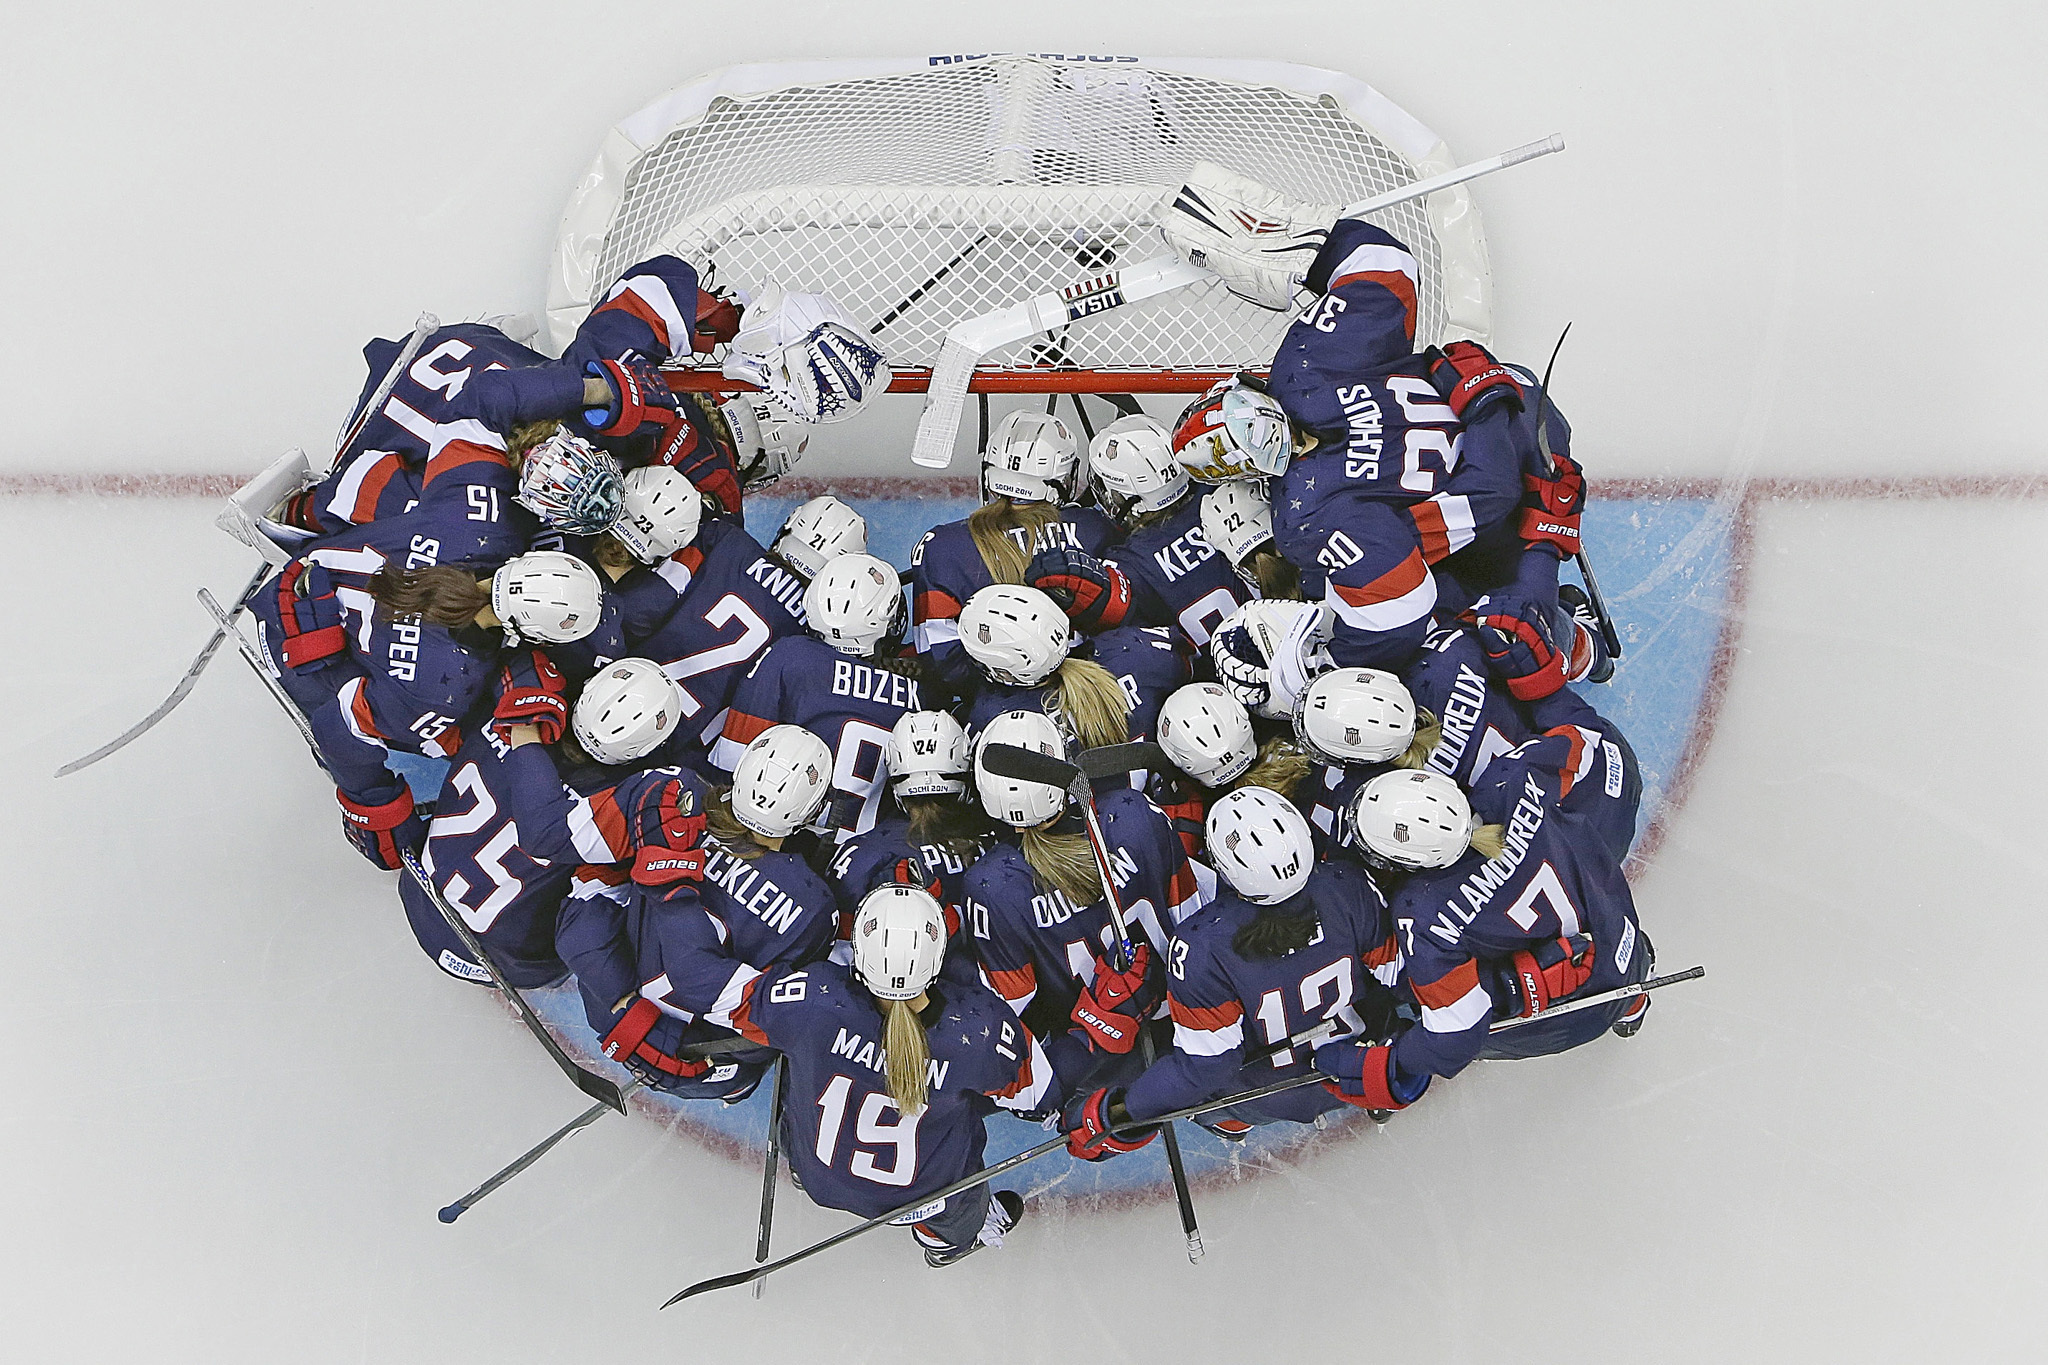 Team Usa Women S Hockey At The Olympics In Sochi Wallpaper And Image